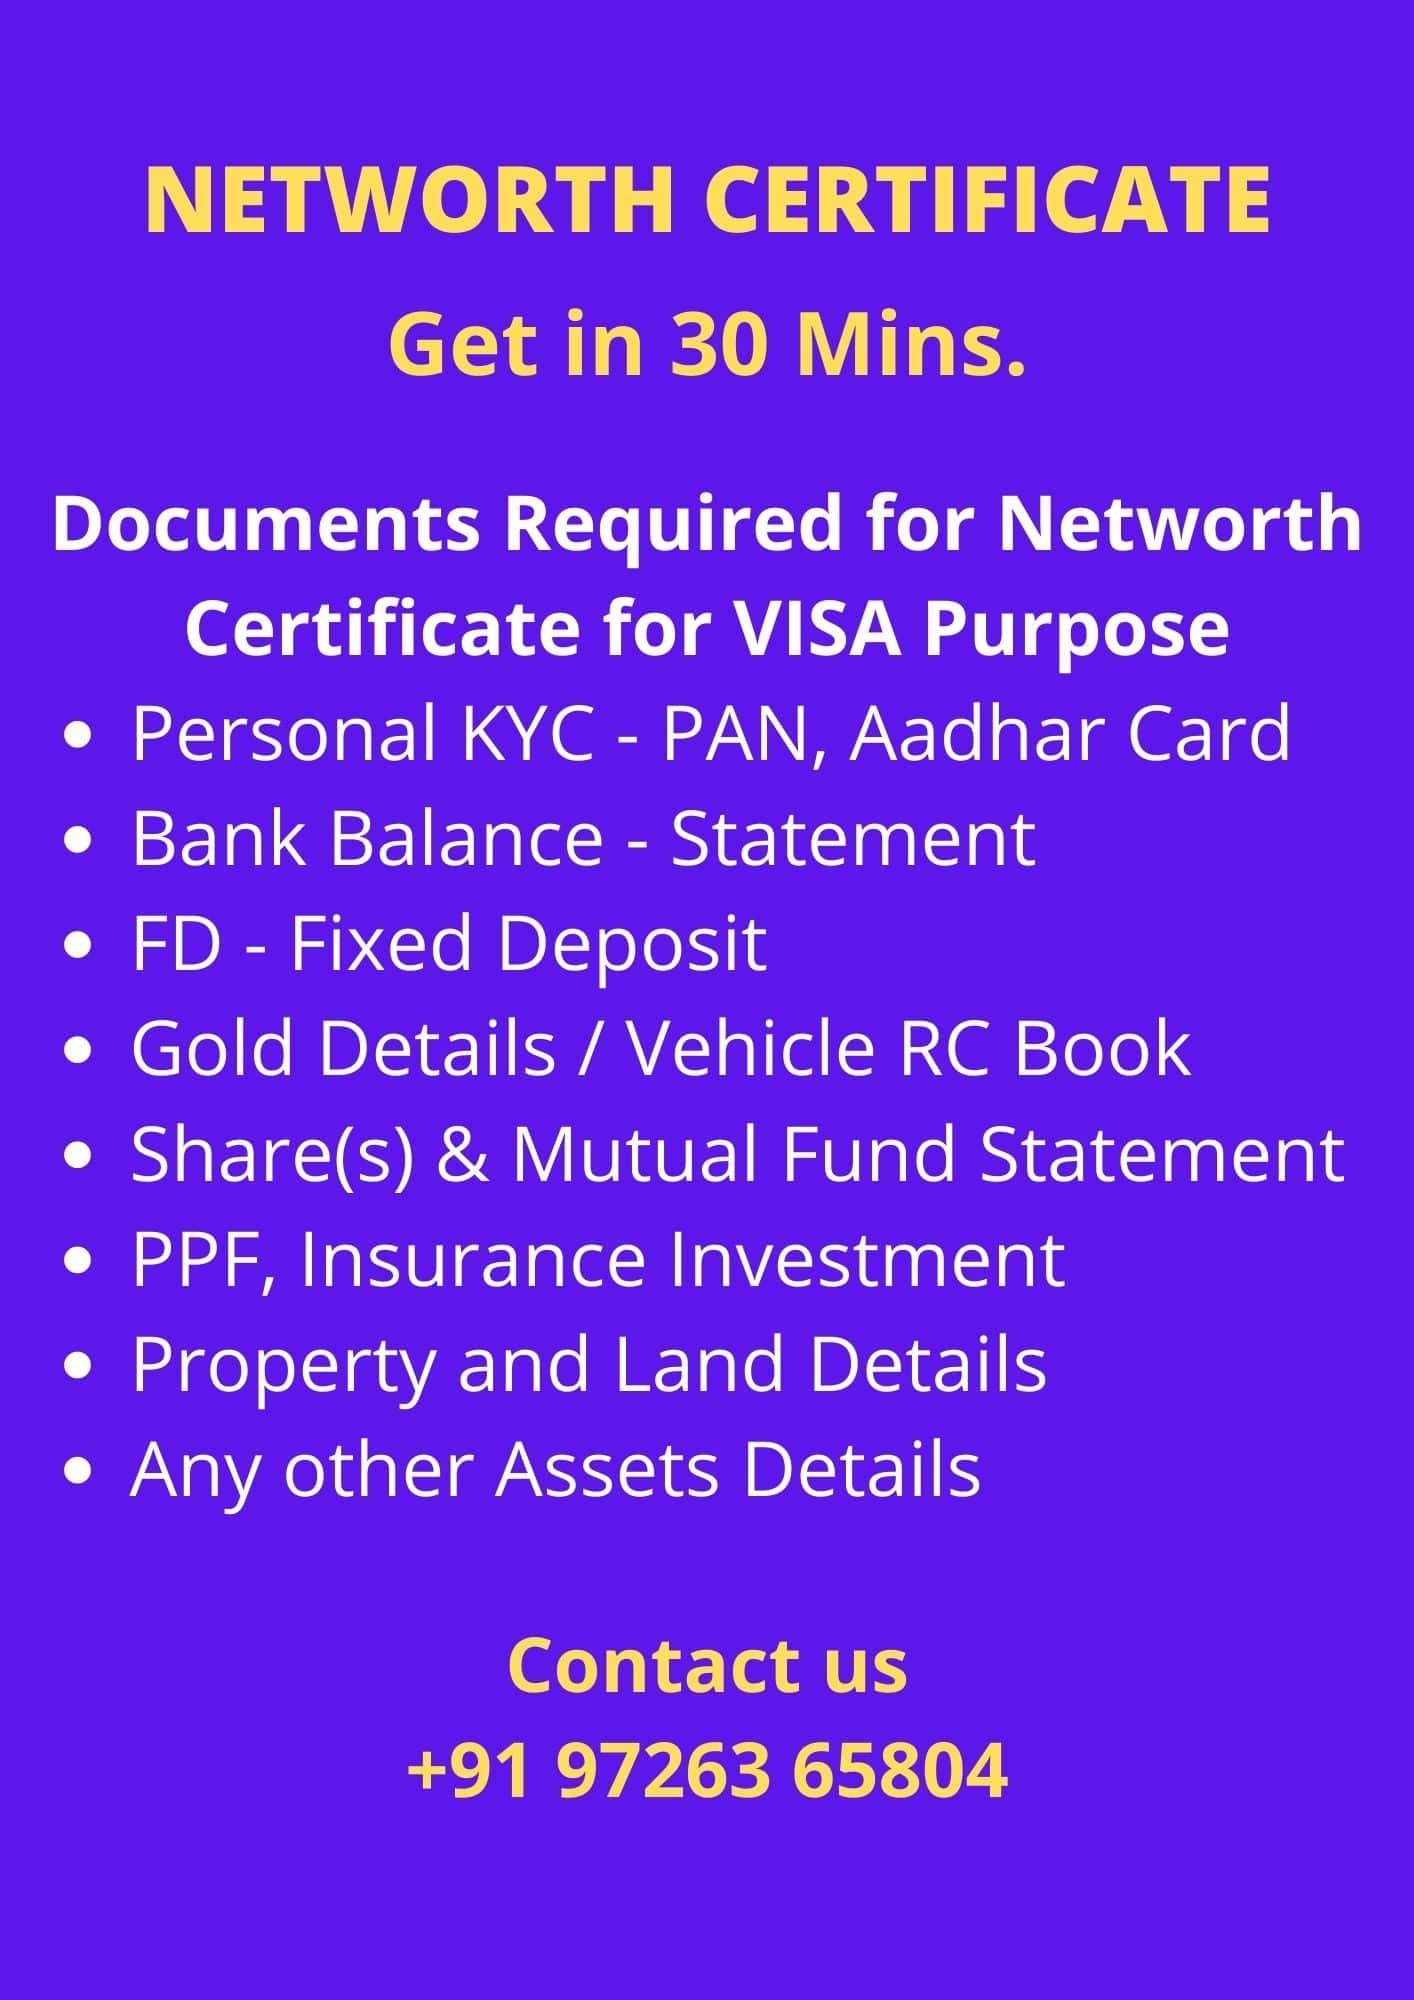 Document Required for Networth Certificate Preparation for VISA